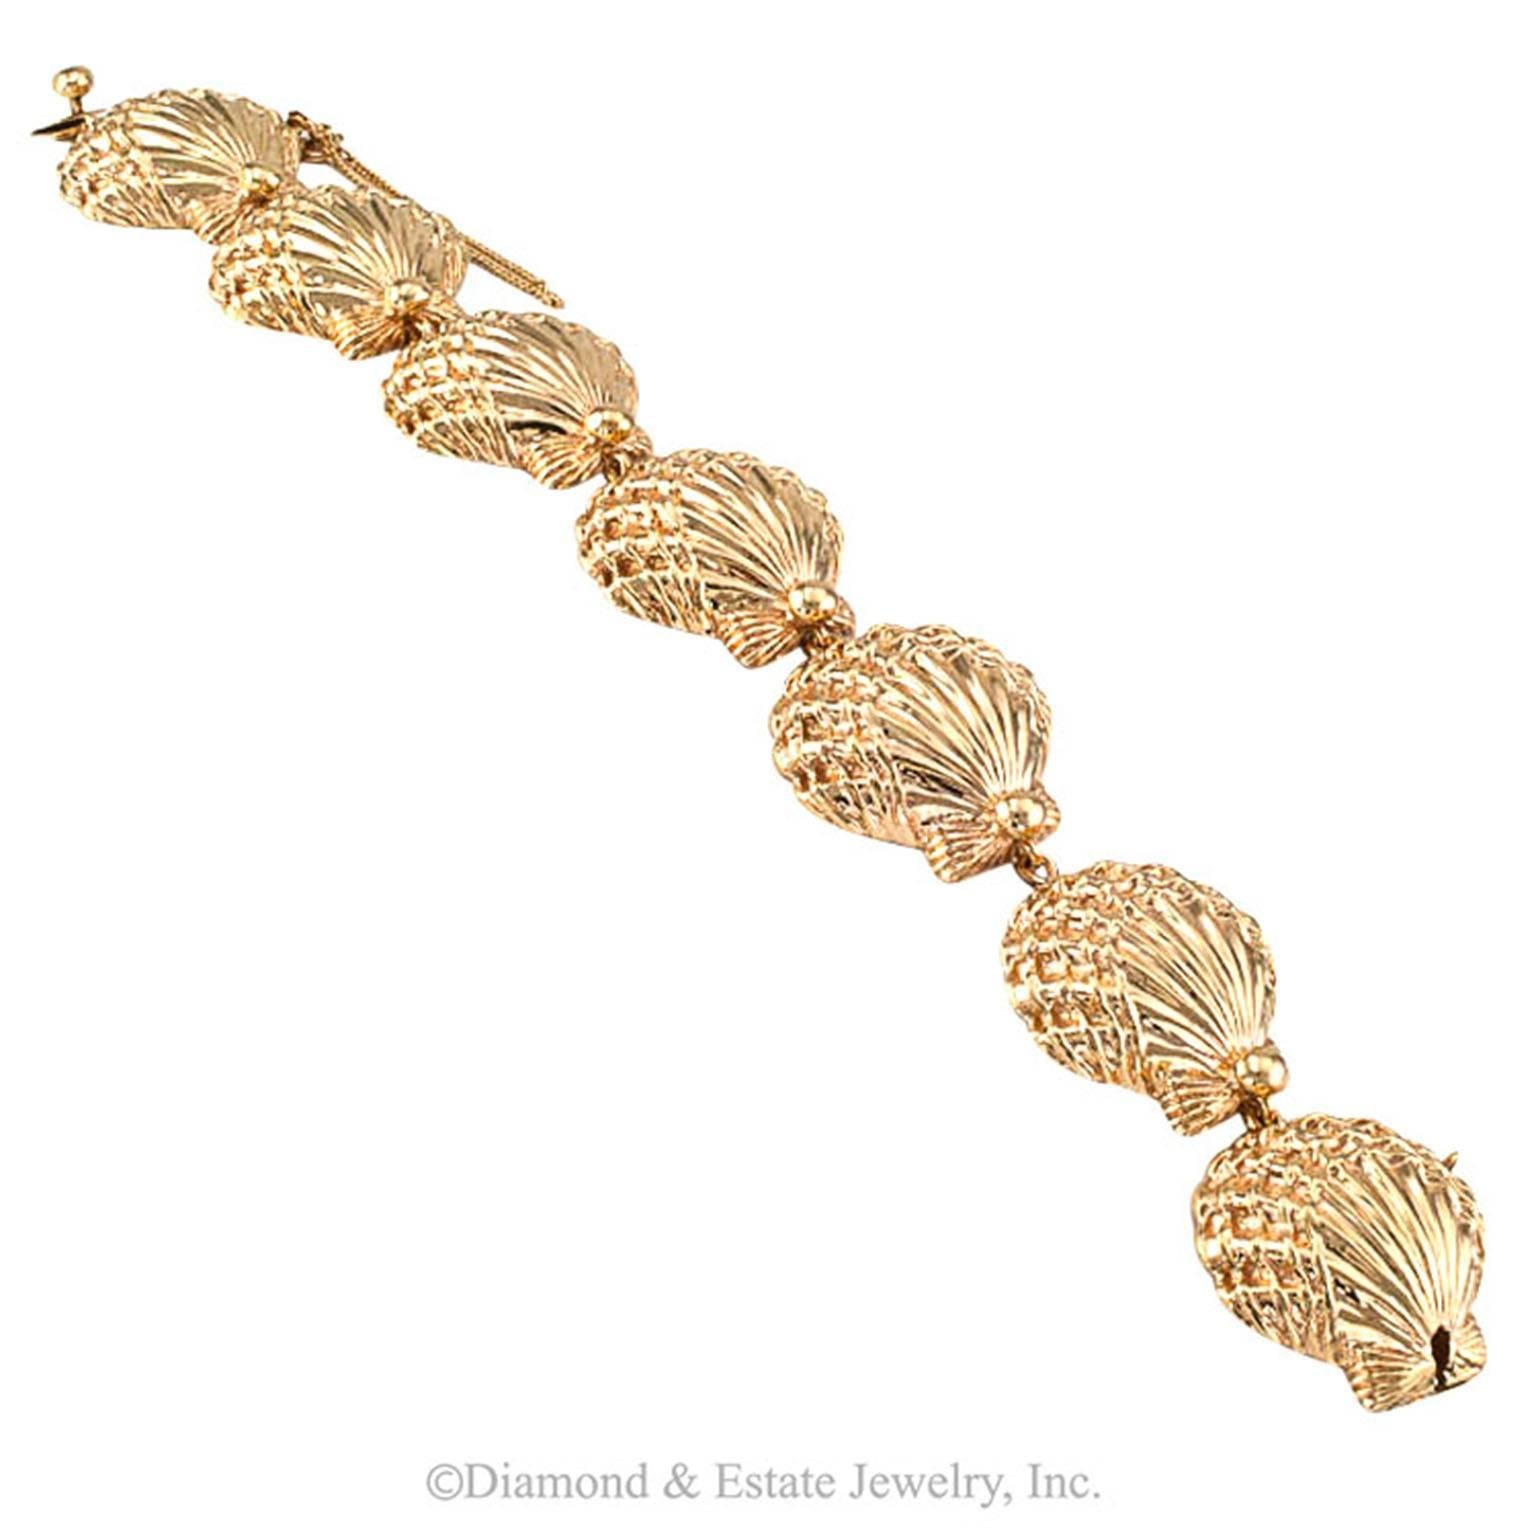 Ruser Estate Gold Sea Shell Bracelet

Picture this:  you are out on a date with your significant other.  It has been a wonderful day.  You find yourselves walking on the beach, occasionally picking up shells that wash up with the surf... the sun